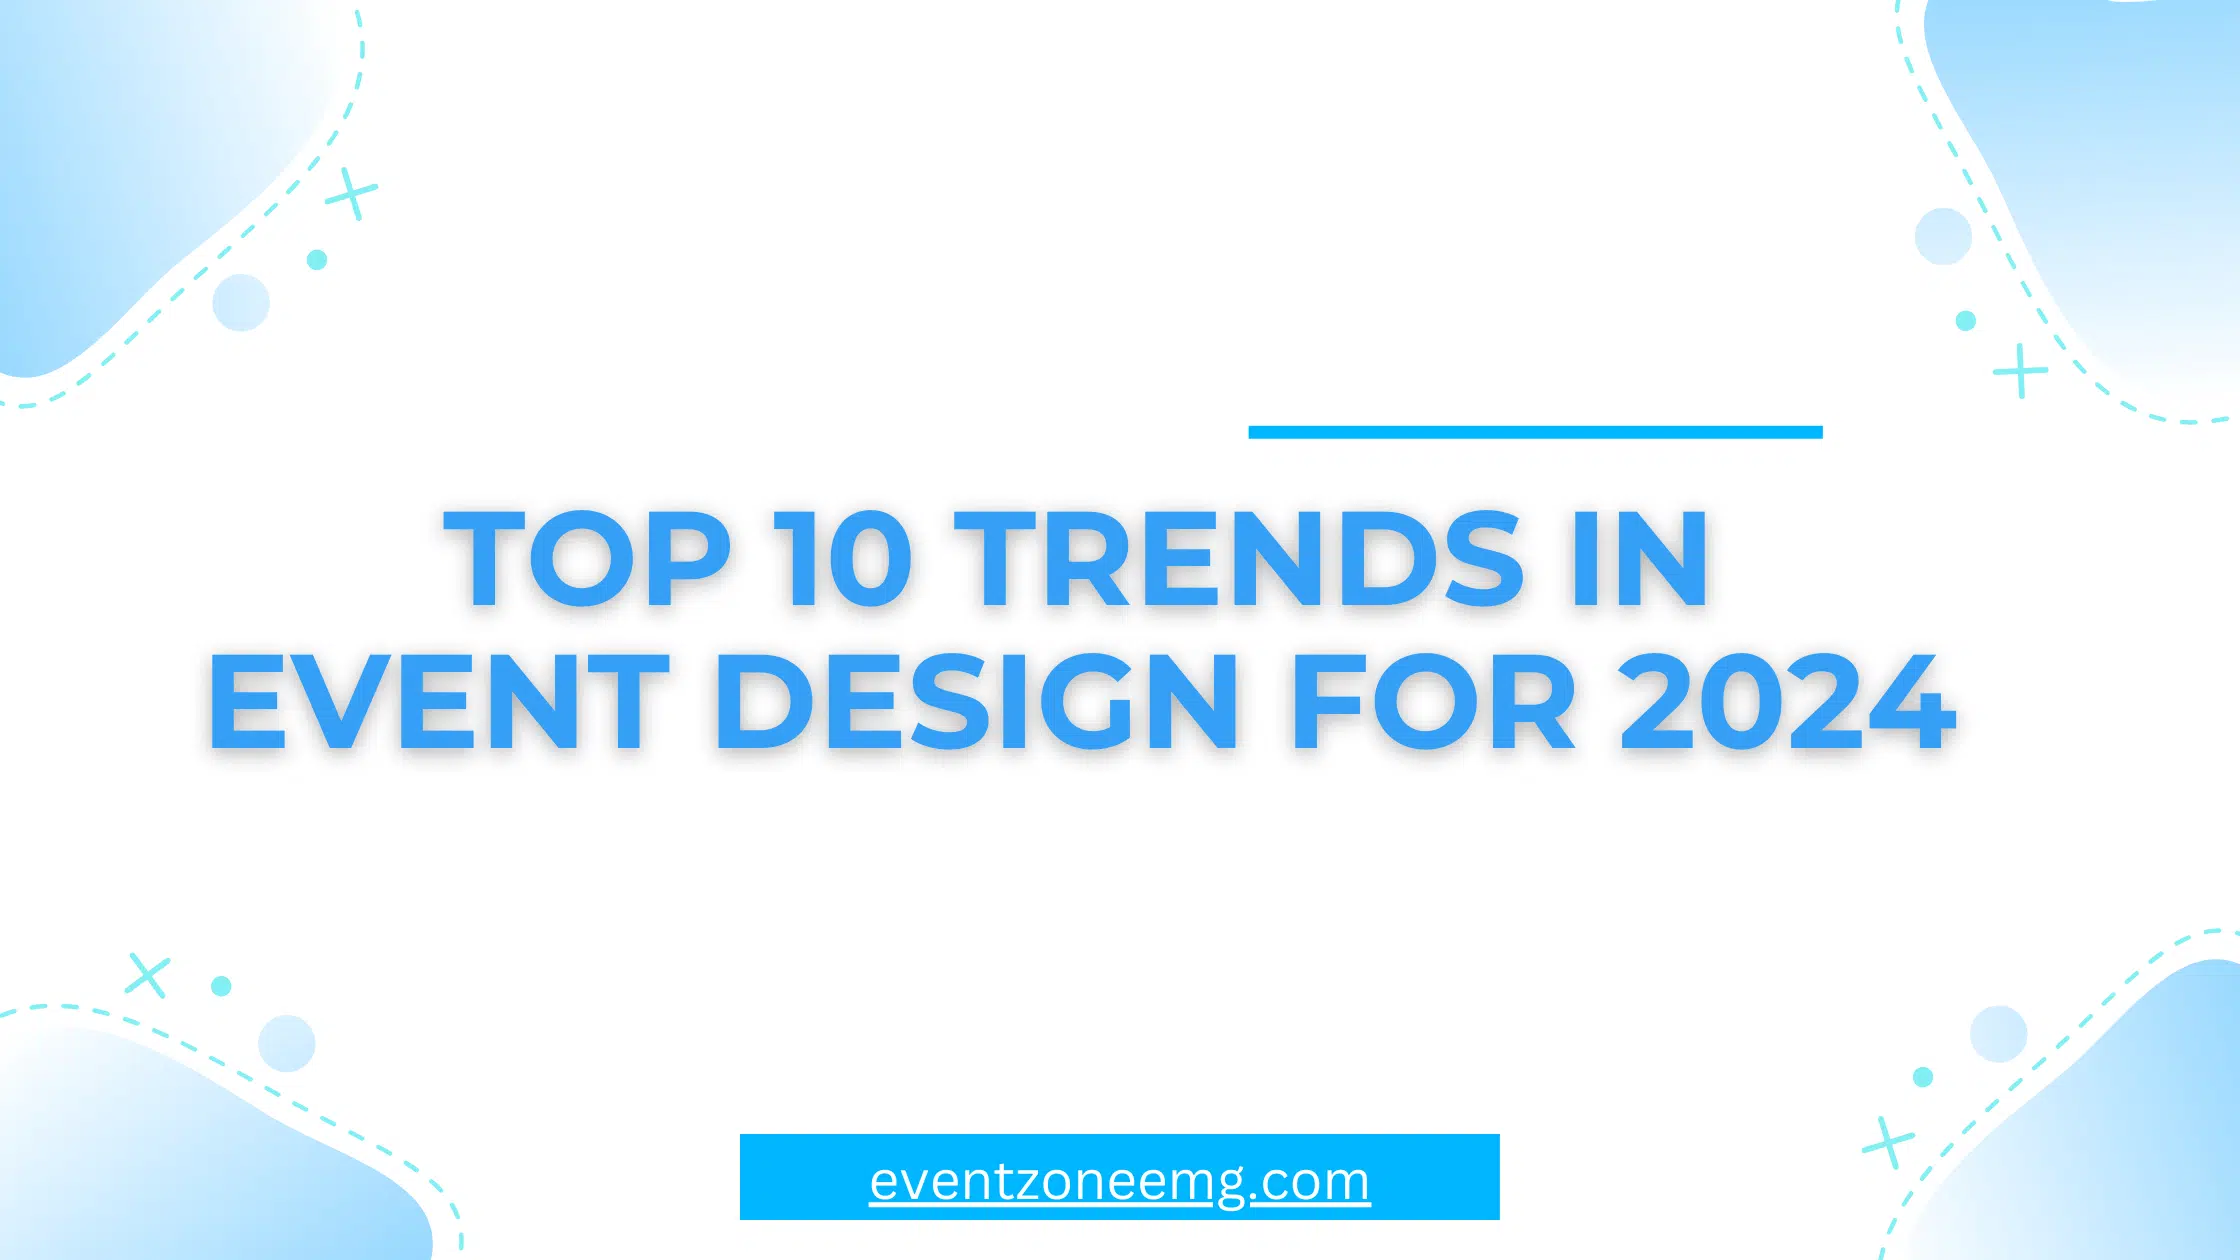 Top 10 Trends in Event Design for 2024